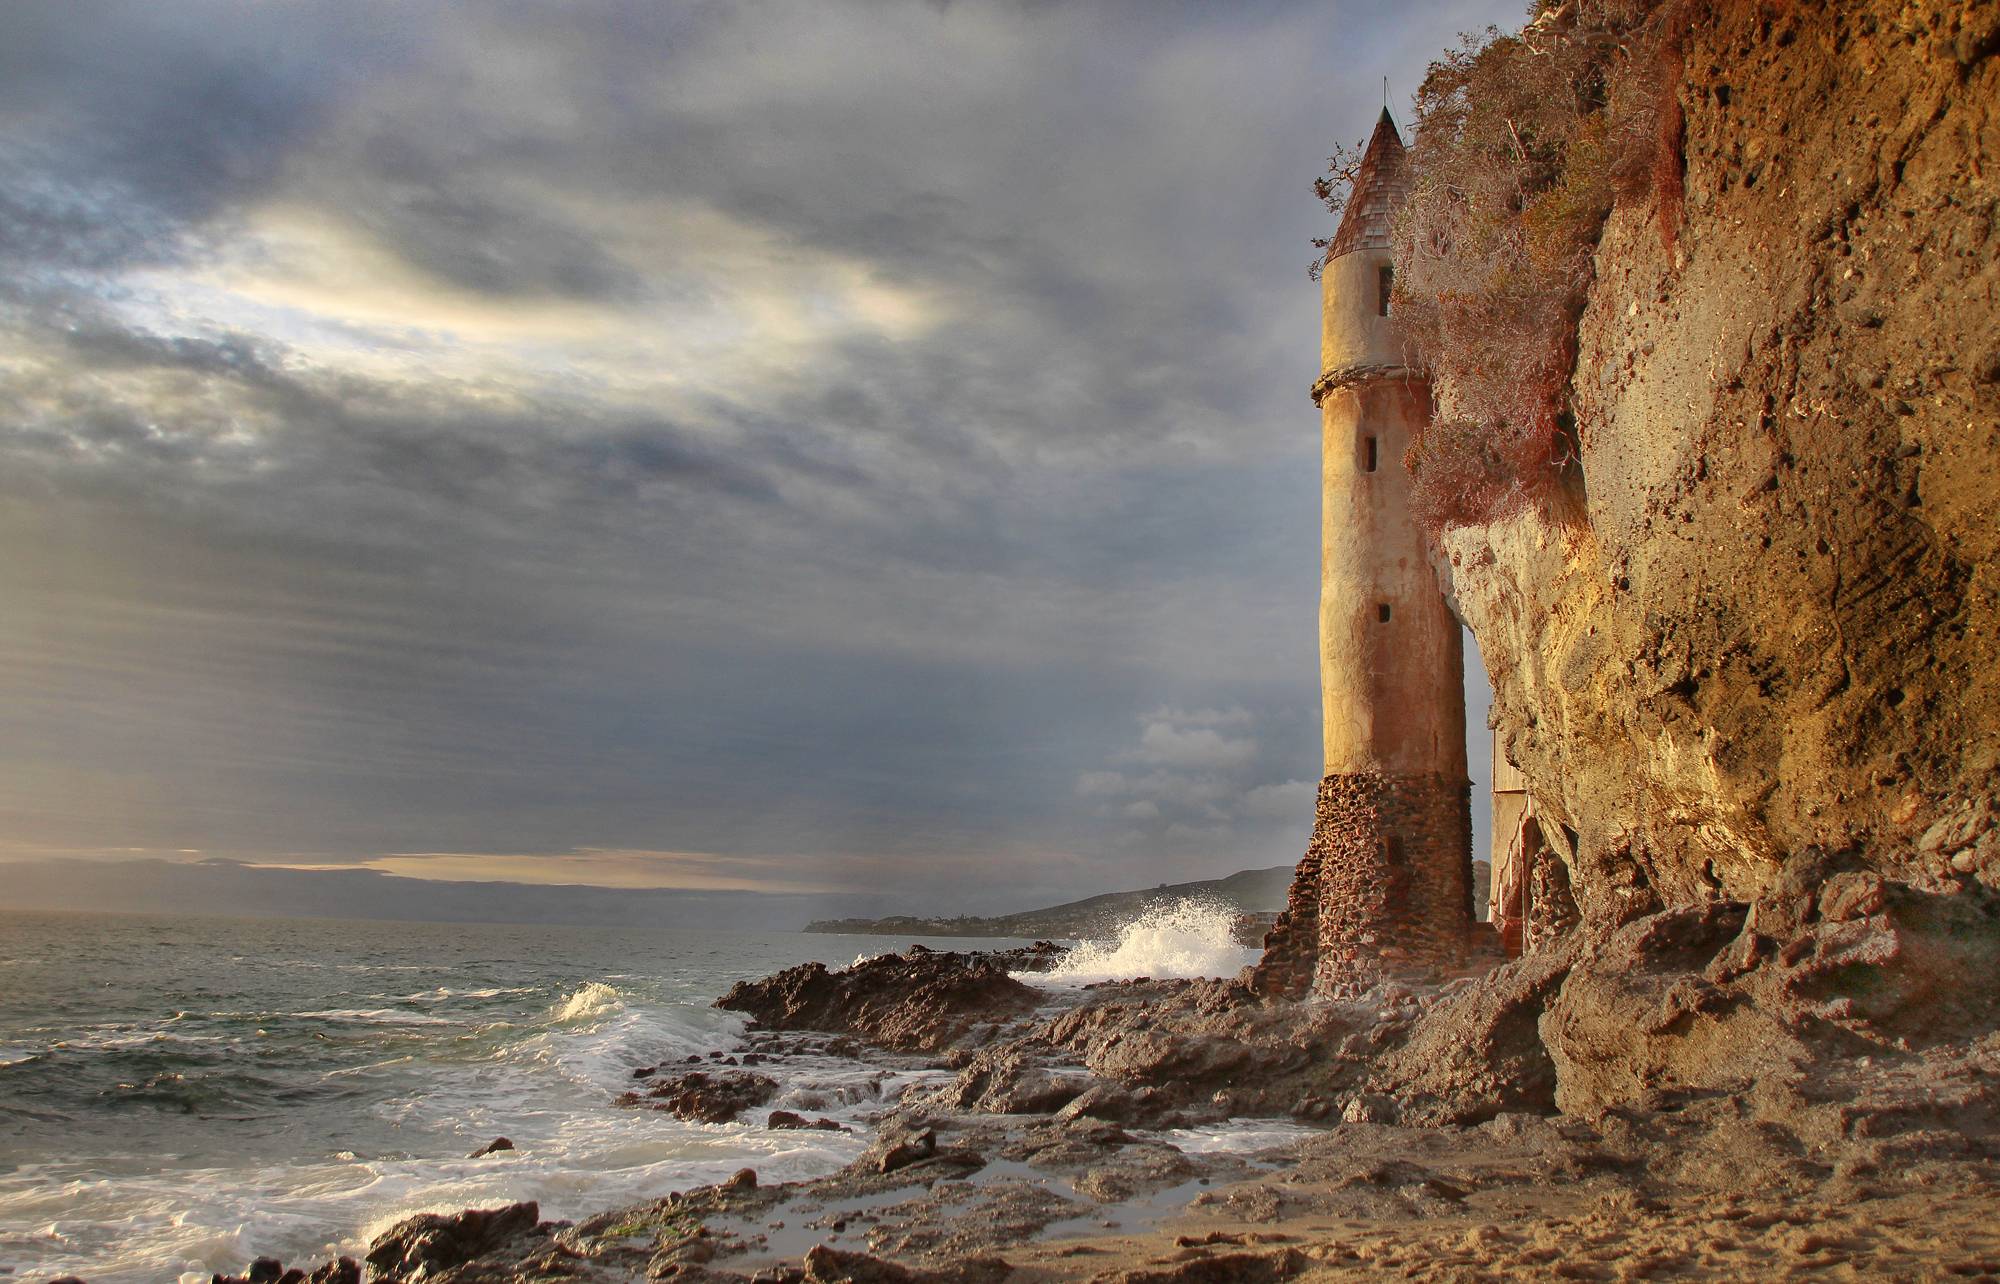 Pirate's Tower in Victoria Beach is a truly unique treasure hiding right around the corner! Visiting this majestic site is a short walk.